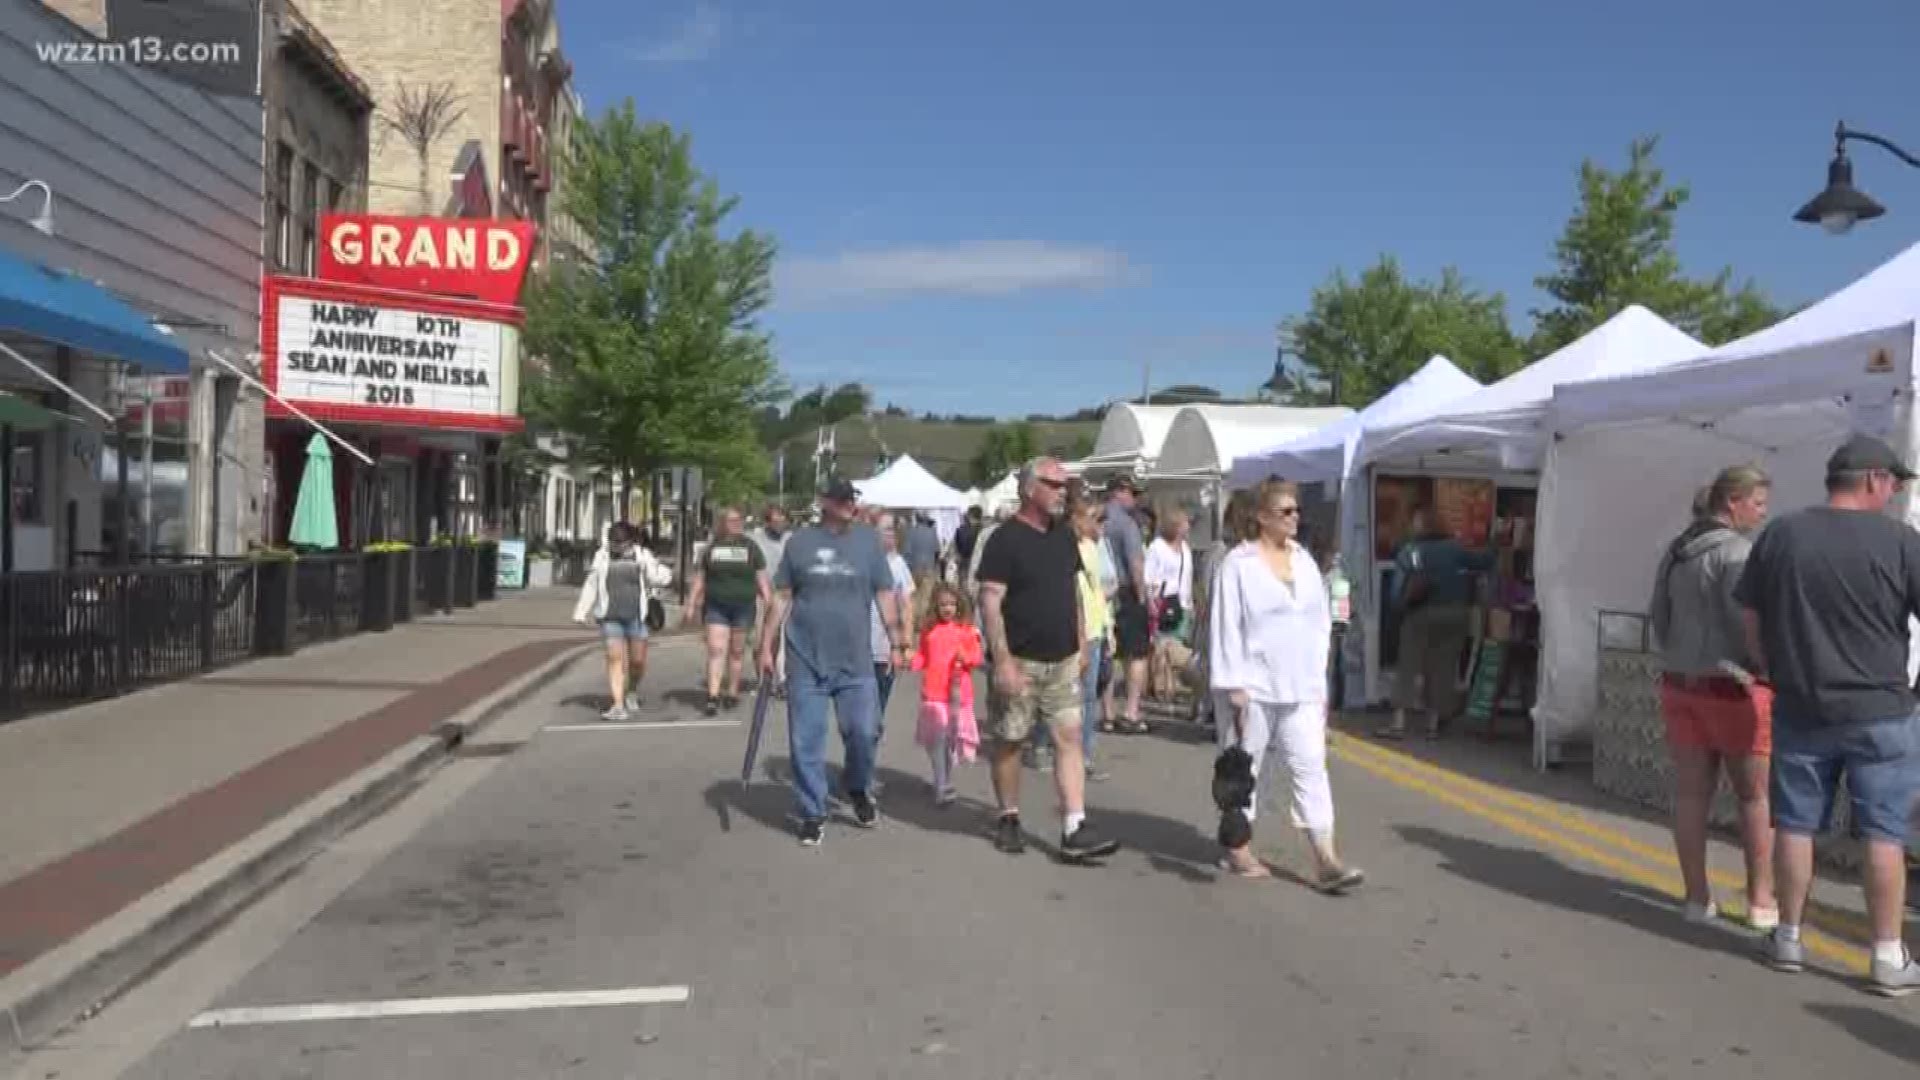 Grand Haven Art Festival held this weekend